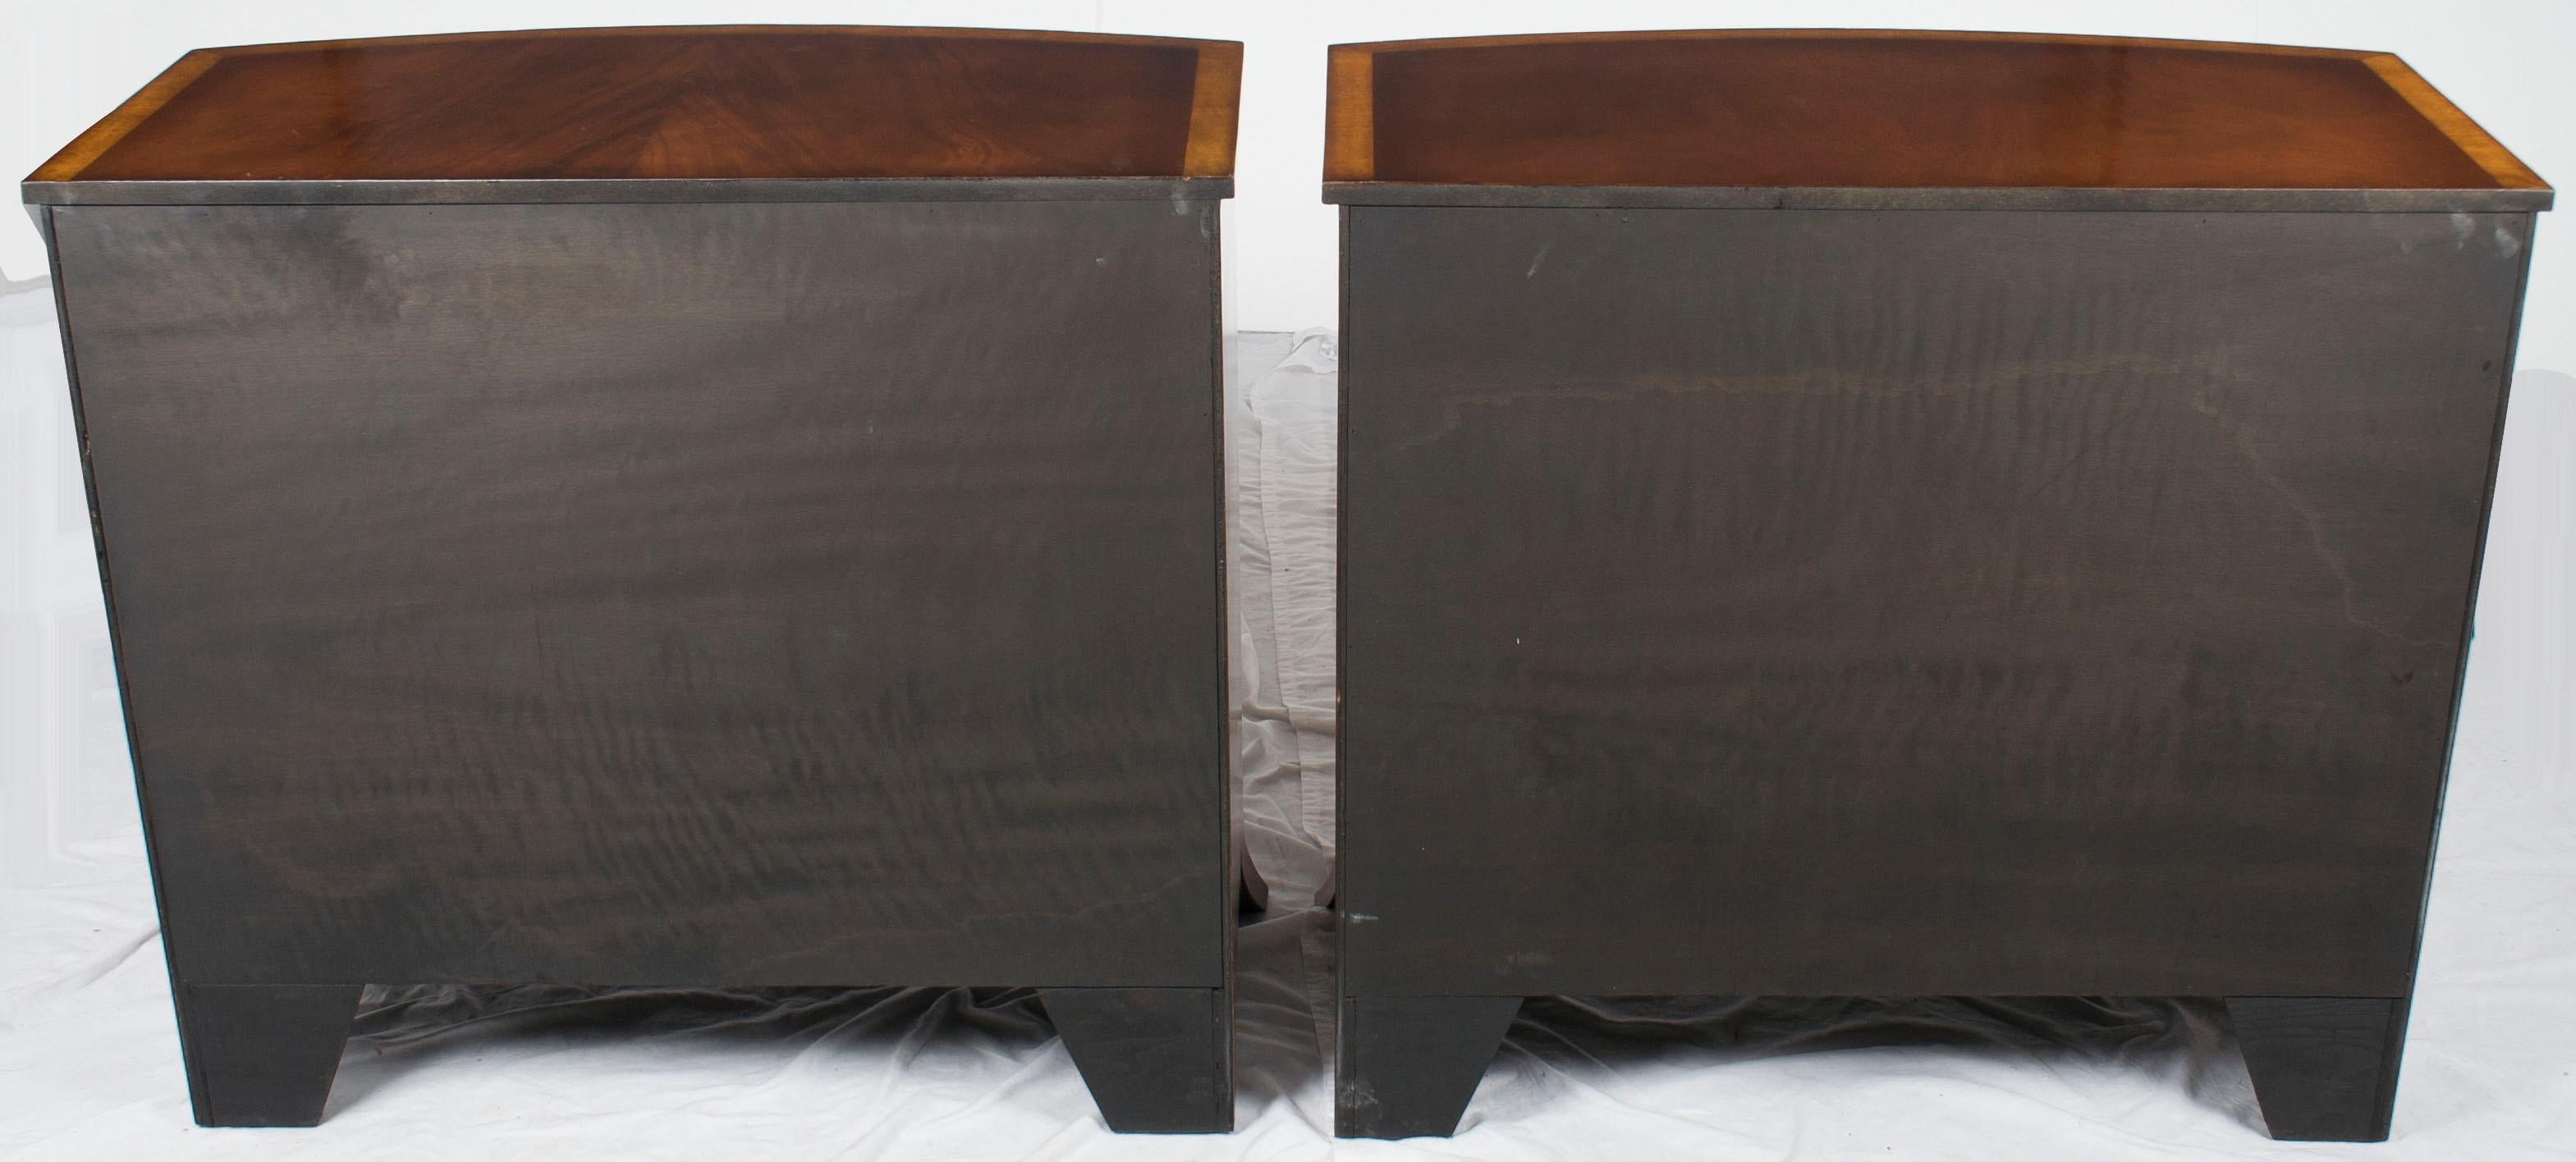 Pair of Bow Front Chest of Drawers Dressers or Large Nightstands in Mahogany 1